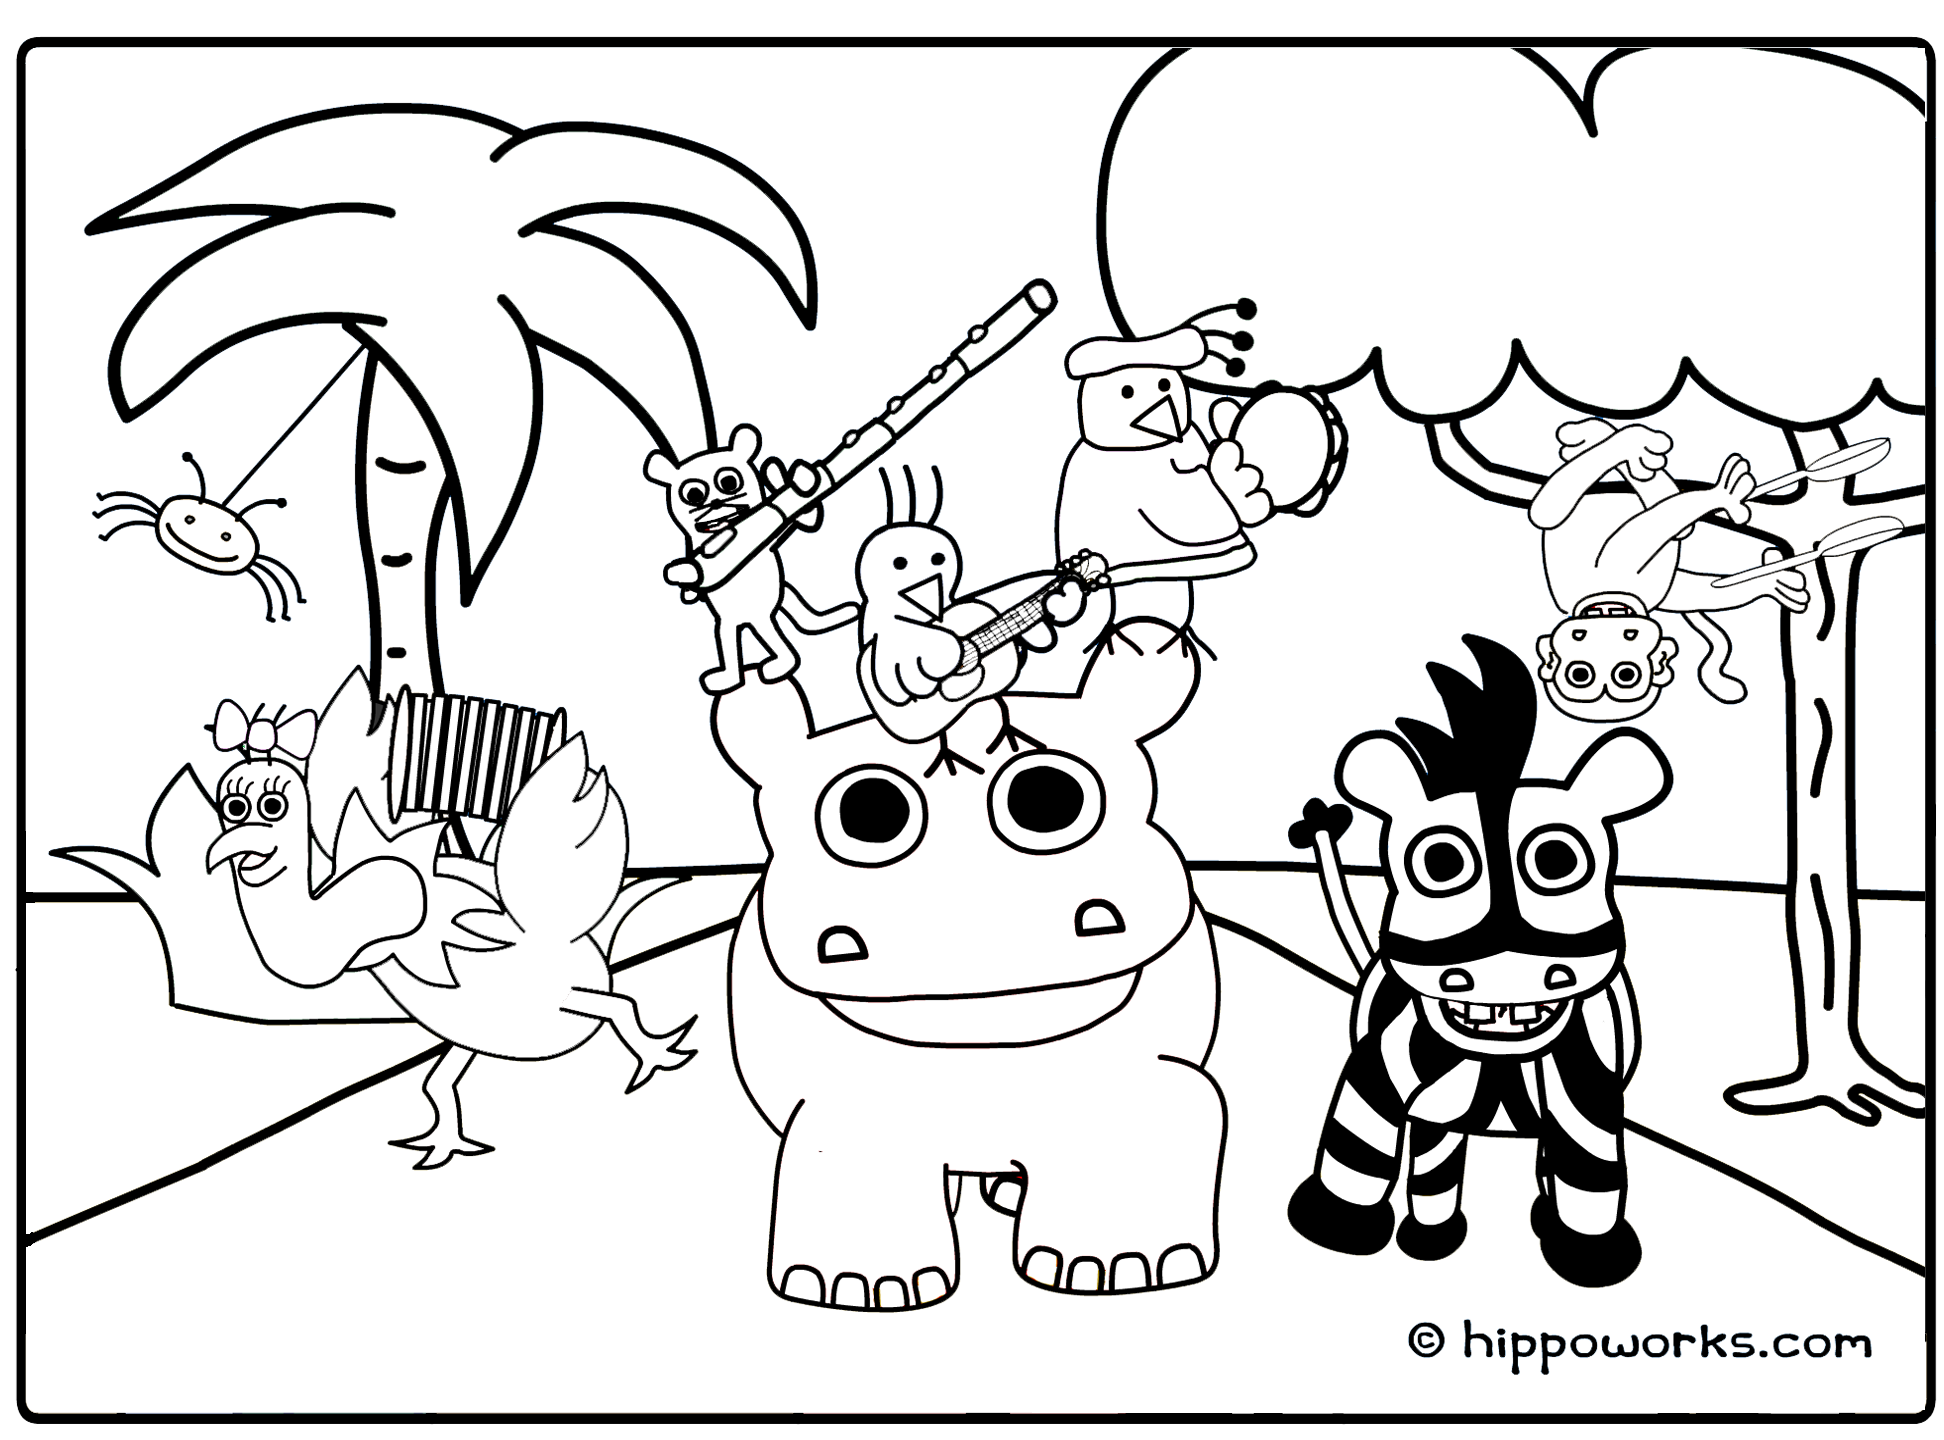 Jungle Coloring Page - Coloring Pages for Kids and for Adults